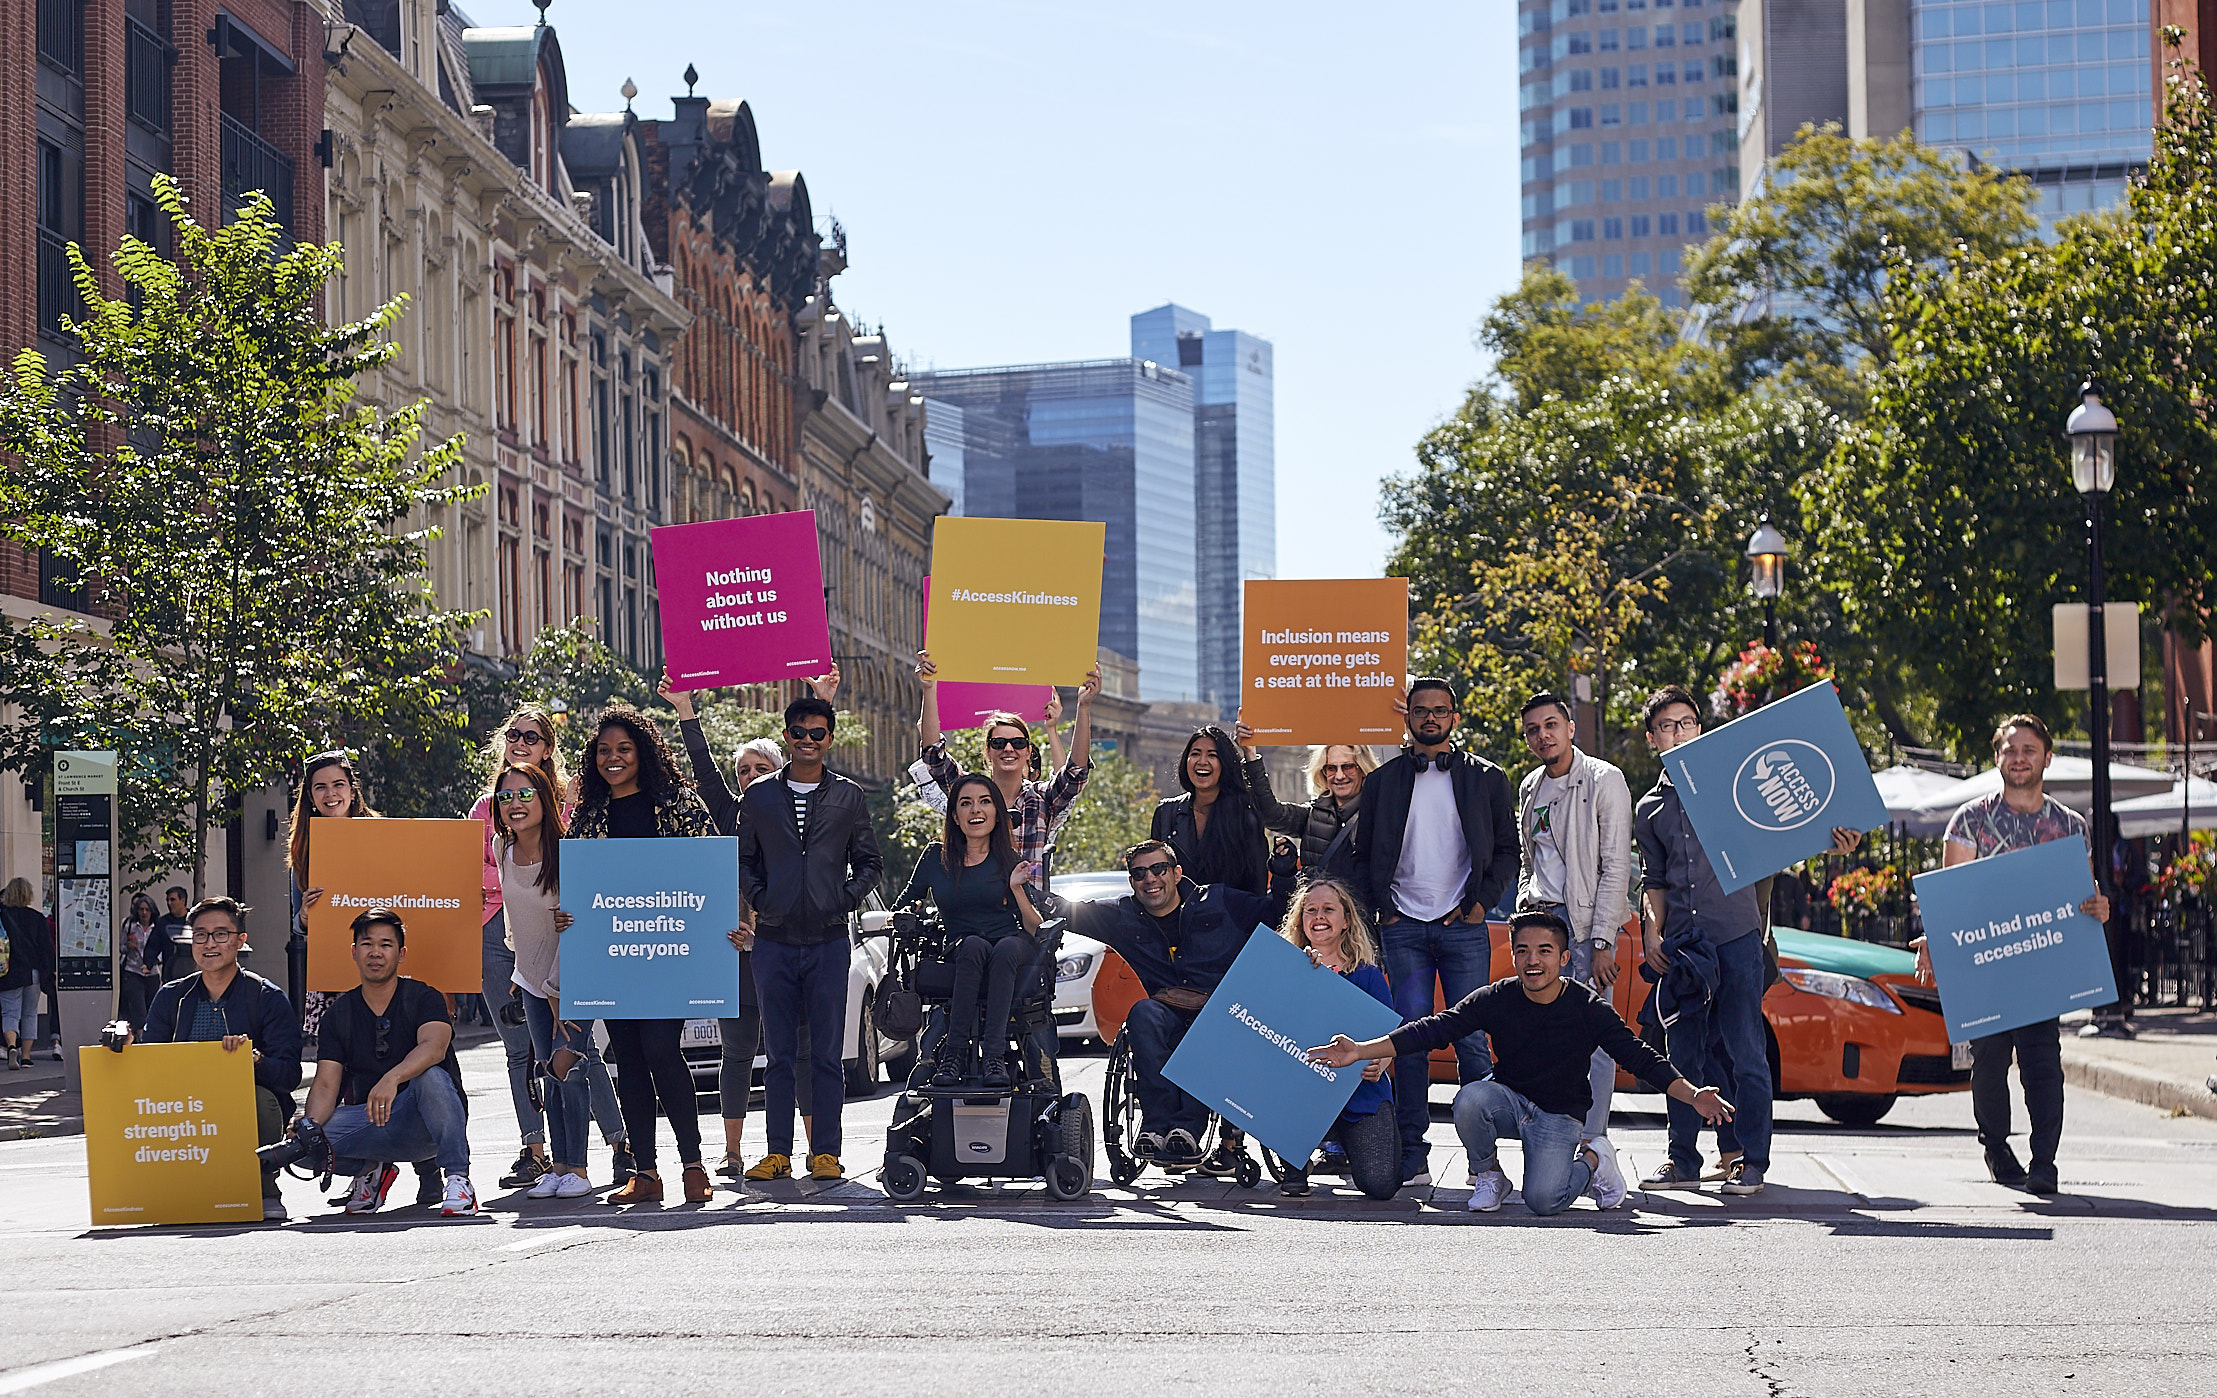 Group of people with disabilities and allies stopping traffic in downtown Toronto. They are holding up various signs that promote kindness.